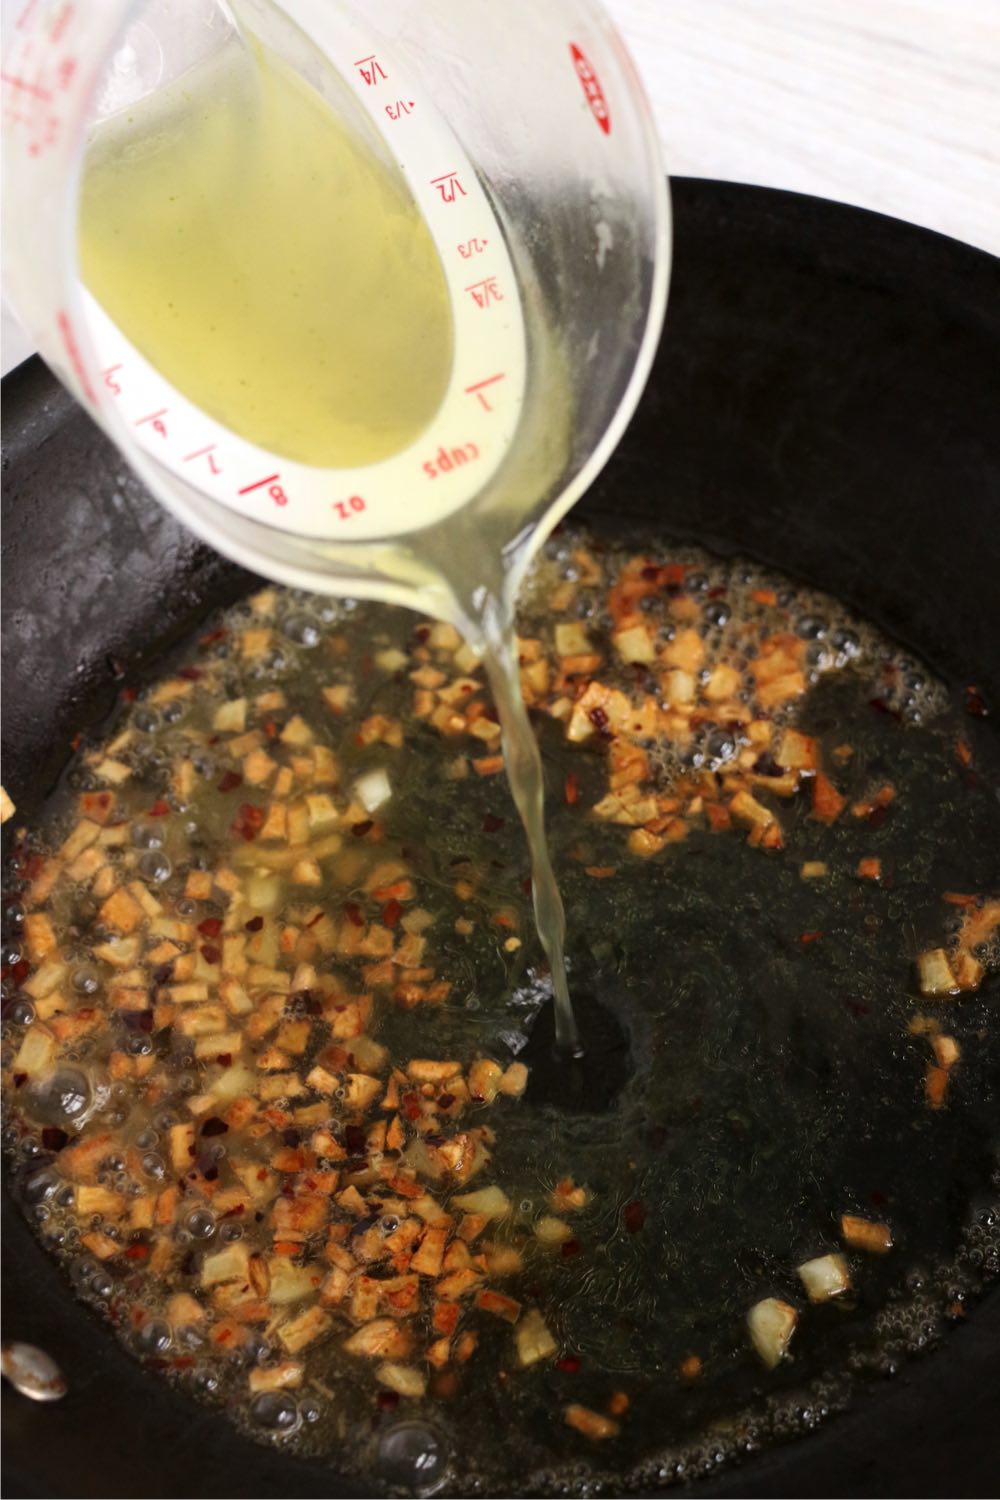 Adding chicken stock to garlic and red pepper flakes